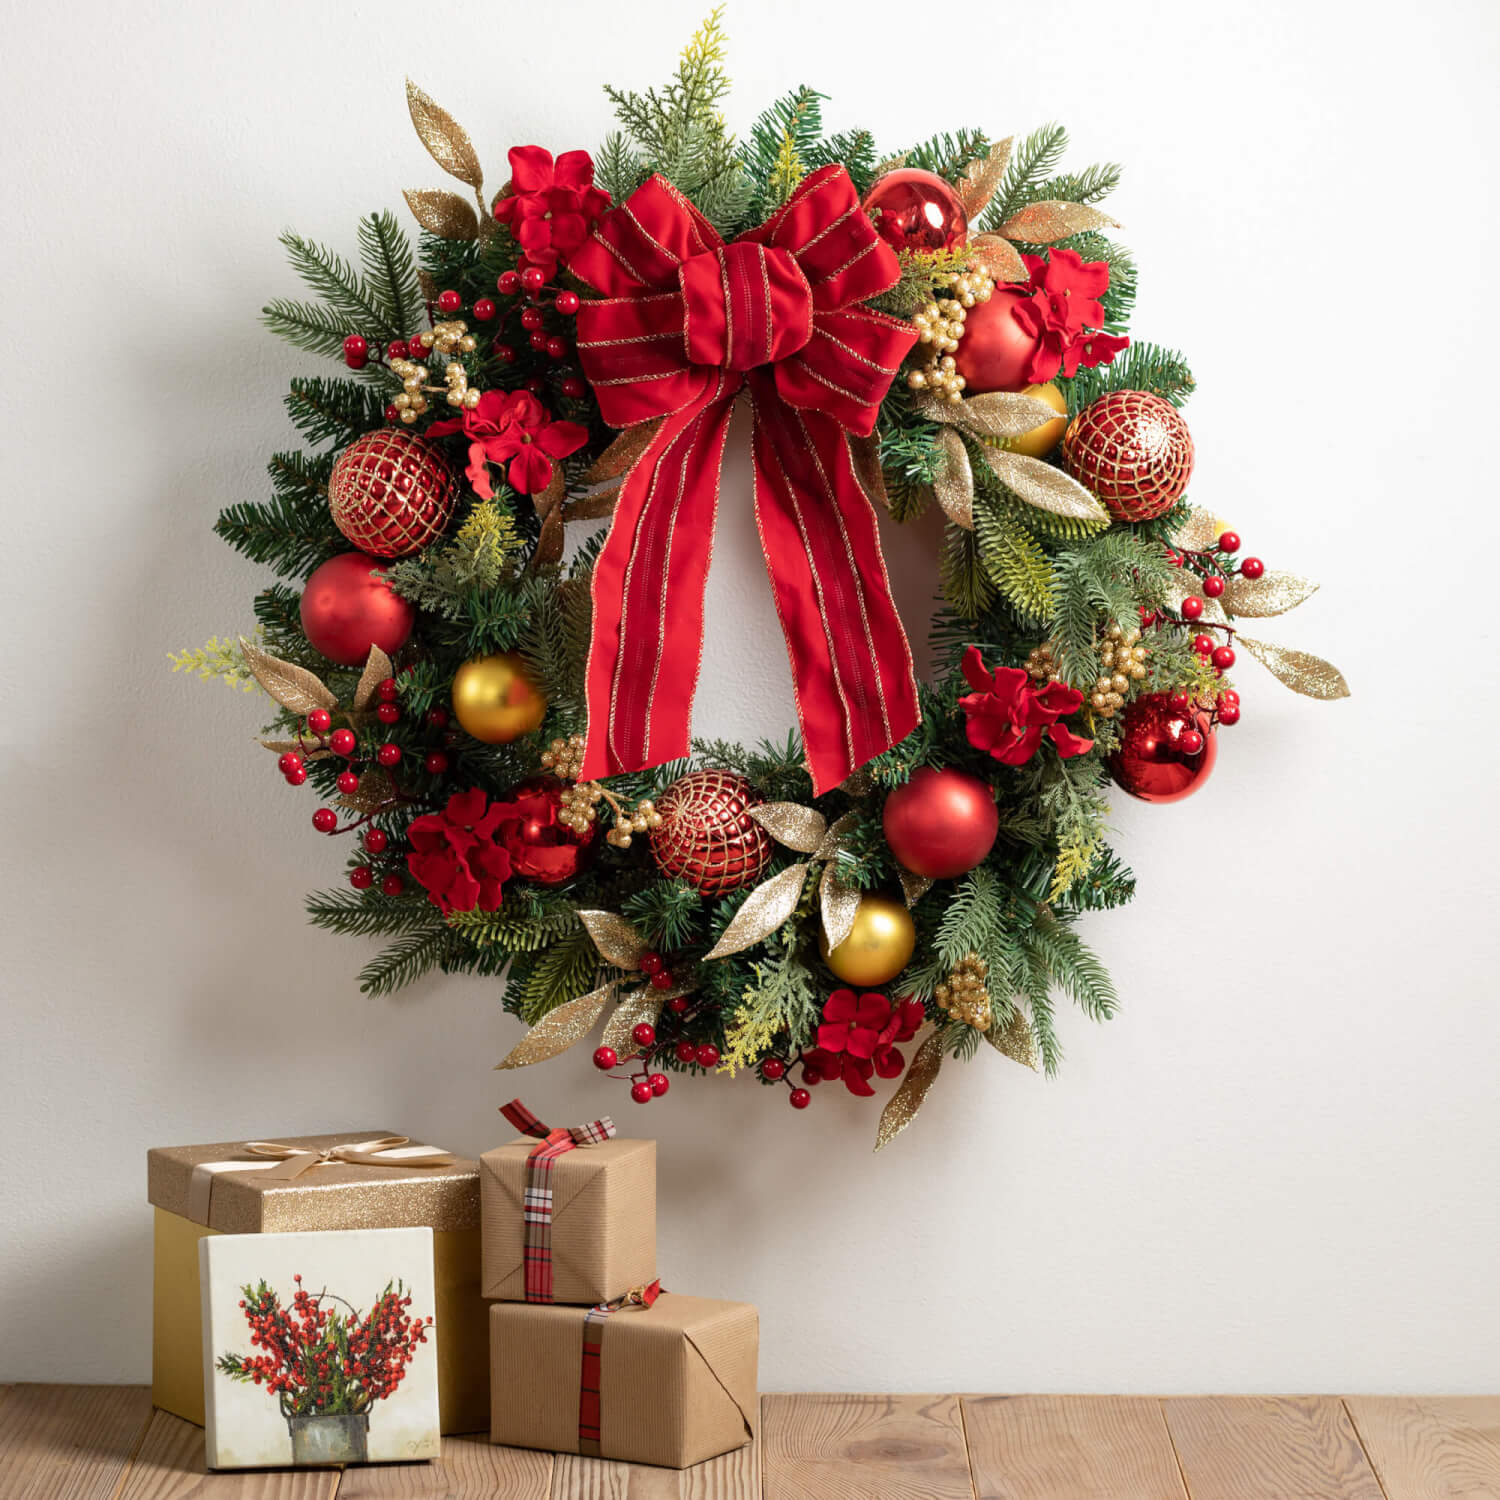 Shop Christmas Wreaths: Online Holiday Wreath Store